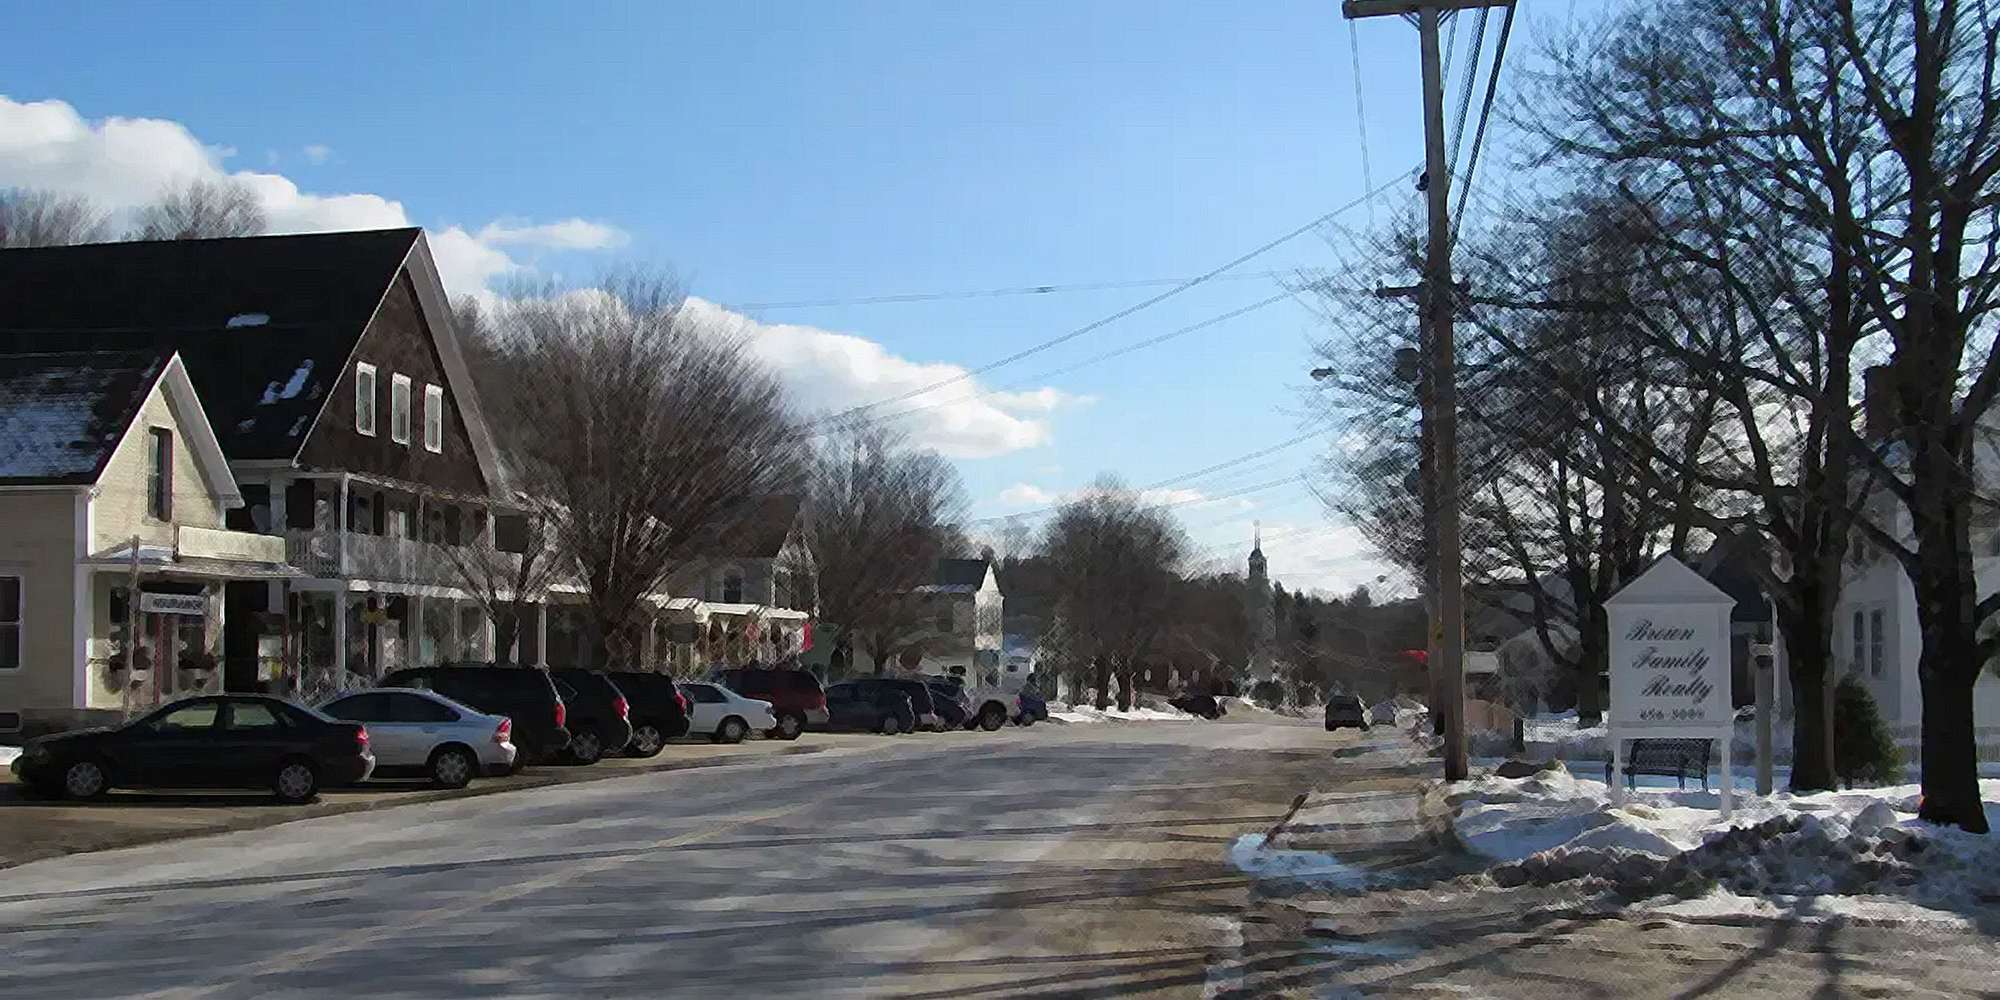 A photo of Route 103 in Warner, New Hampshire